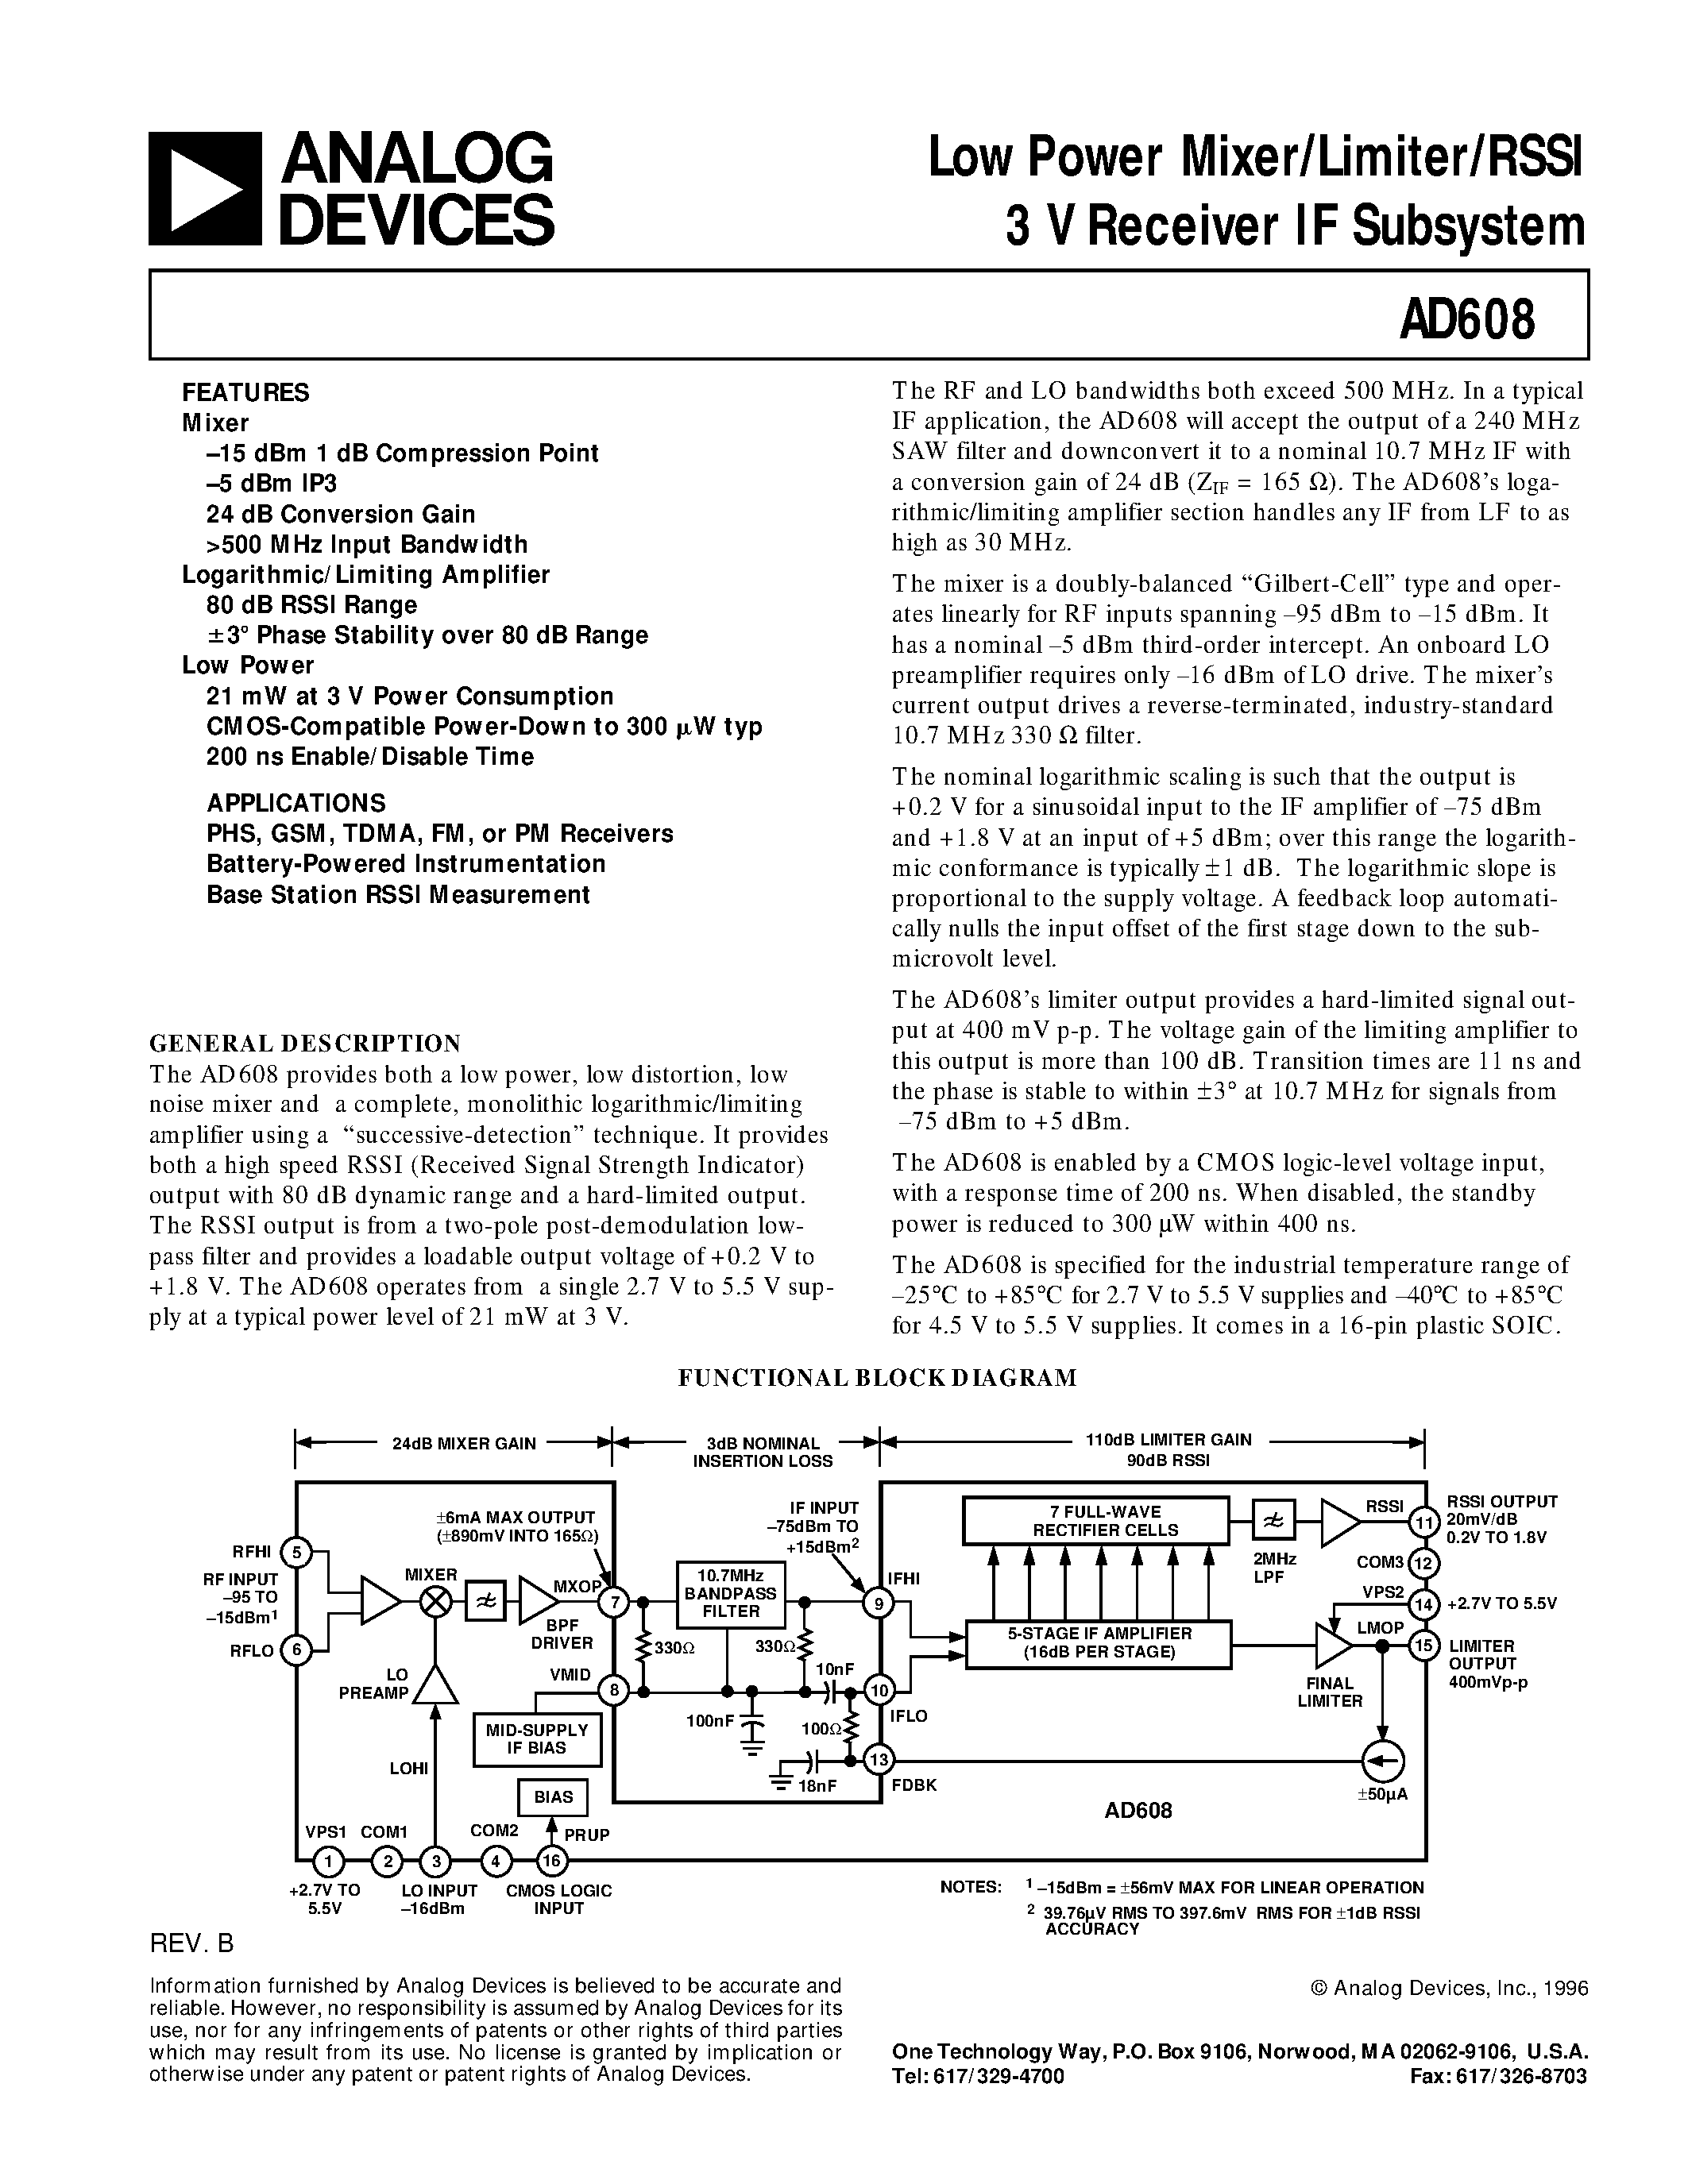 Даташит AD608 - Low Power Mixer/Limiter/RSSI 3 V Receiver IF Subsystem страница 1